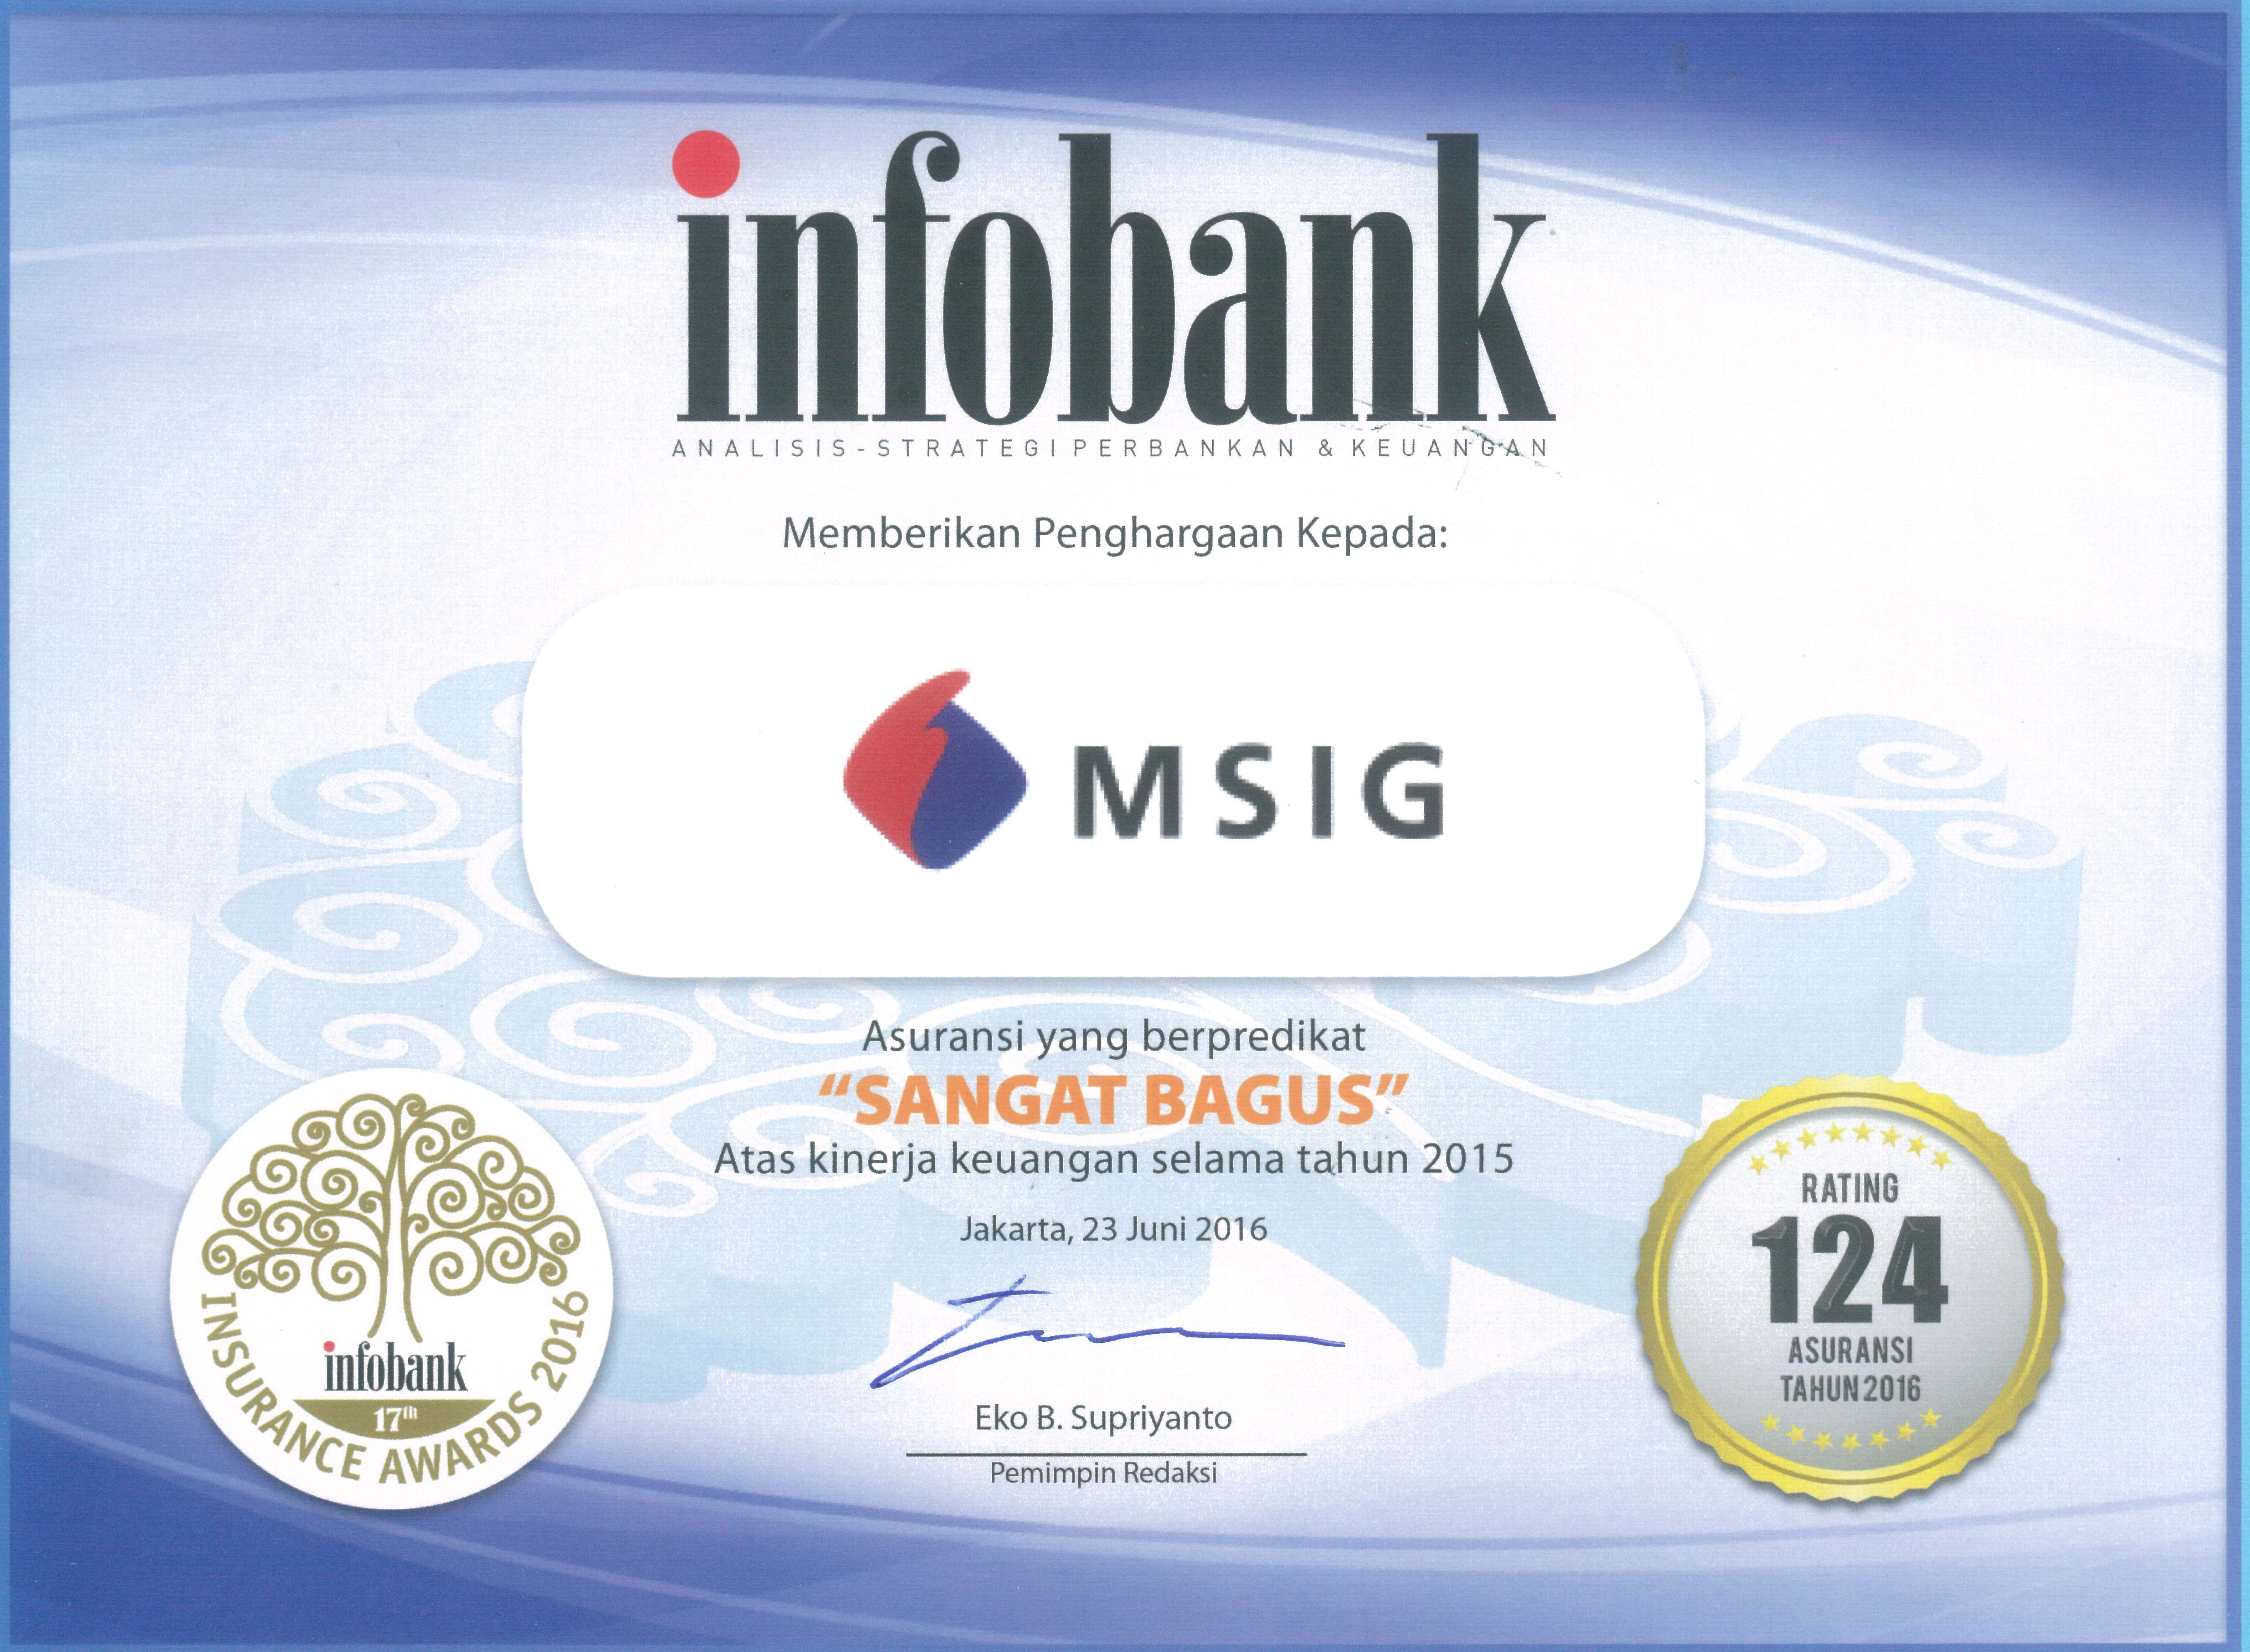 Infobank Magazine; MSIG Show an Excellent Performance for 10 Consecutive Years